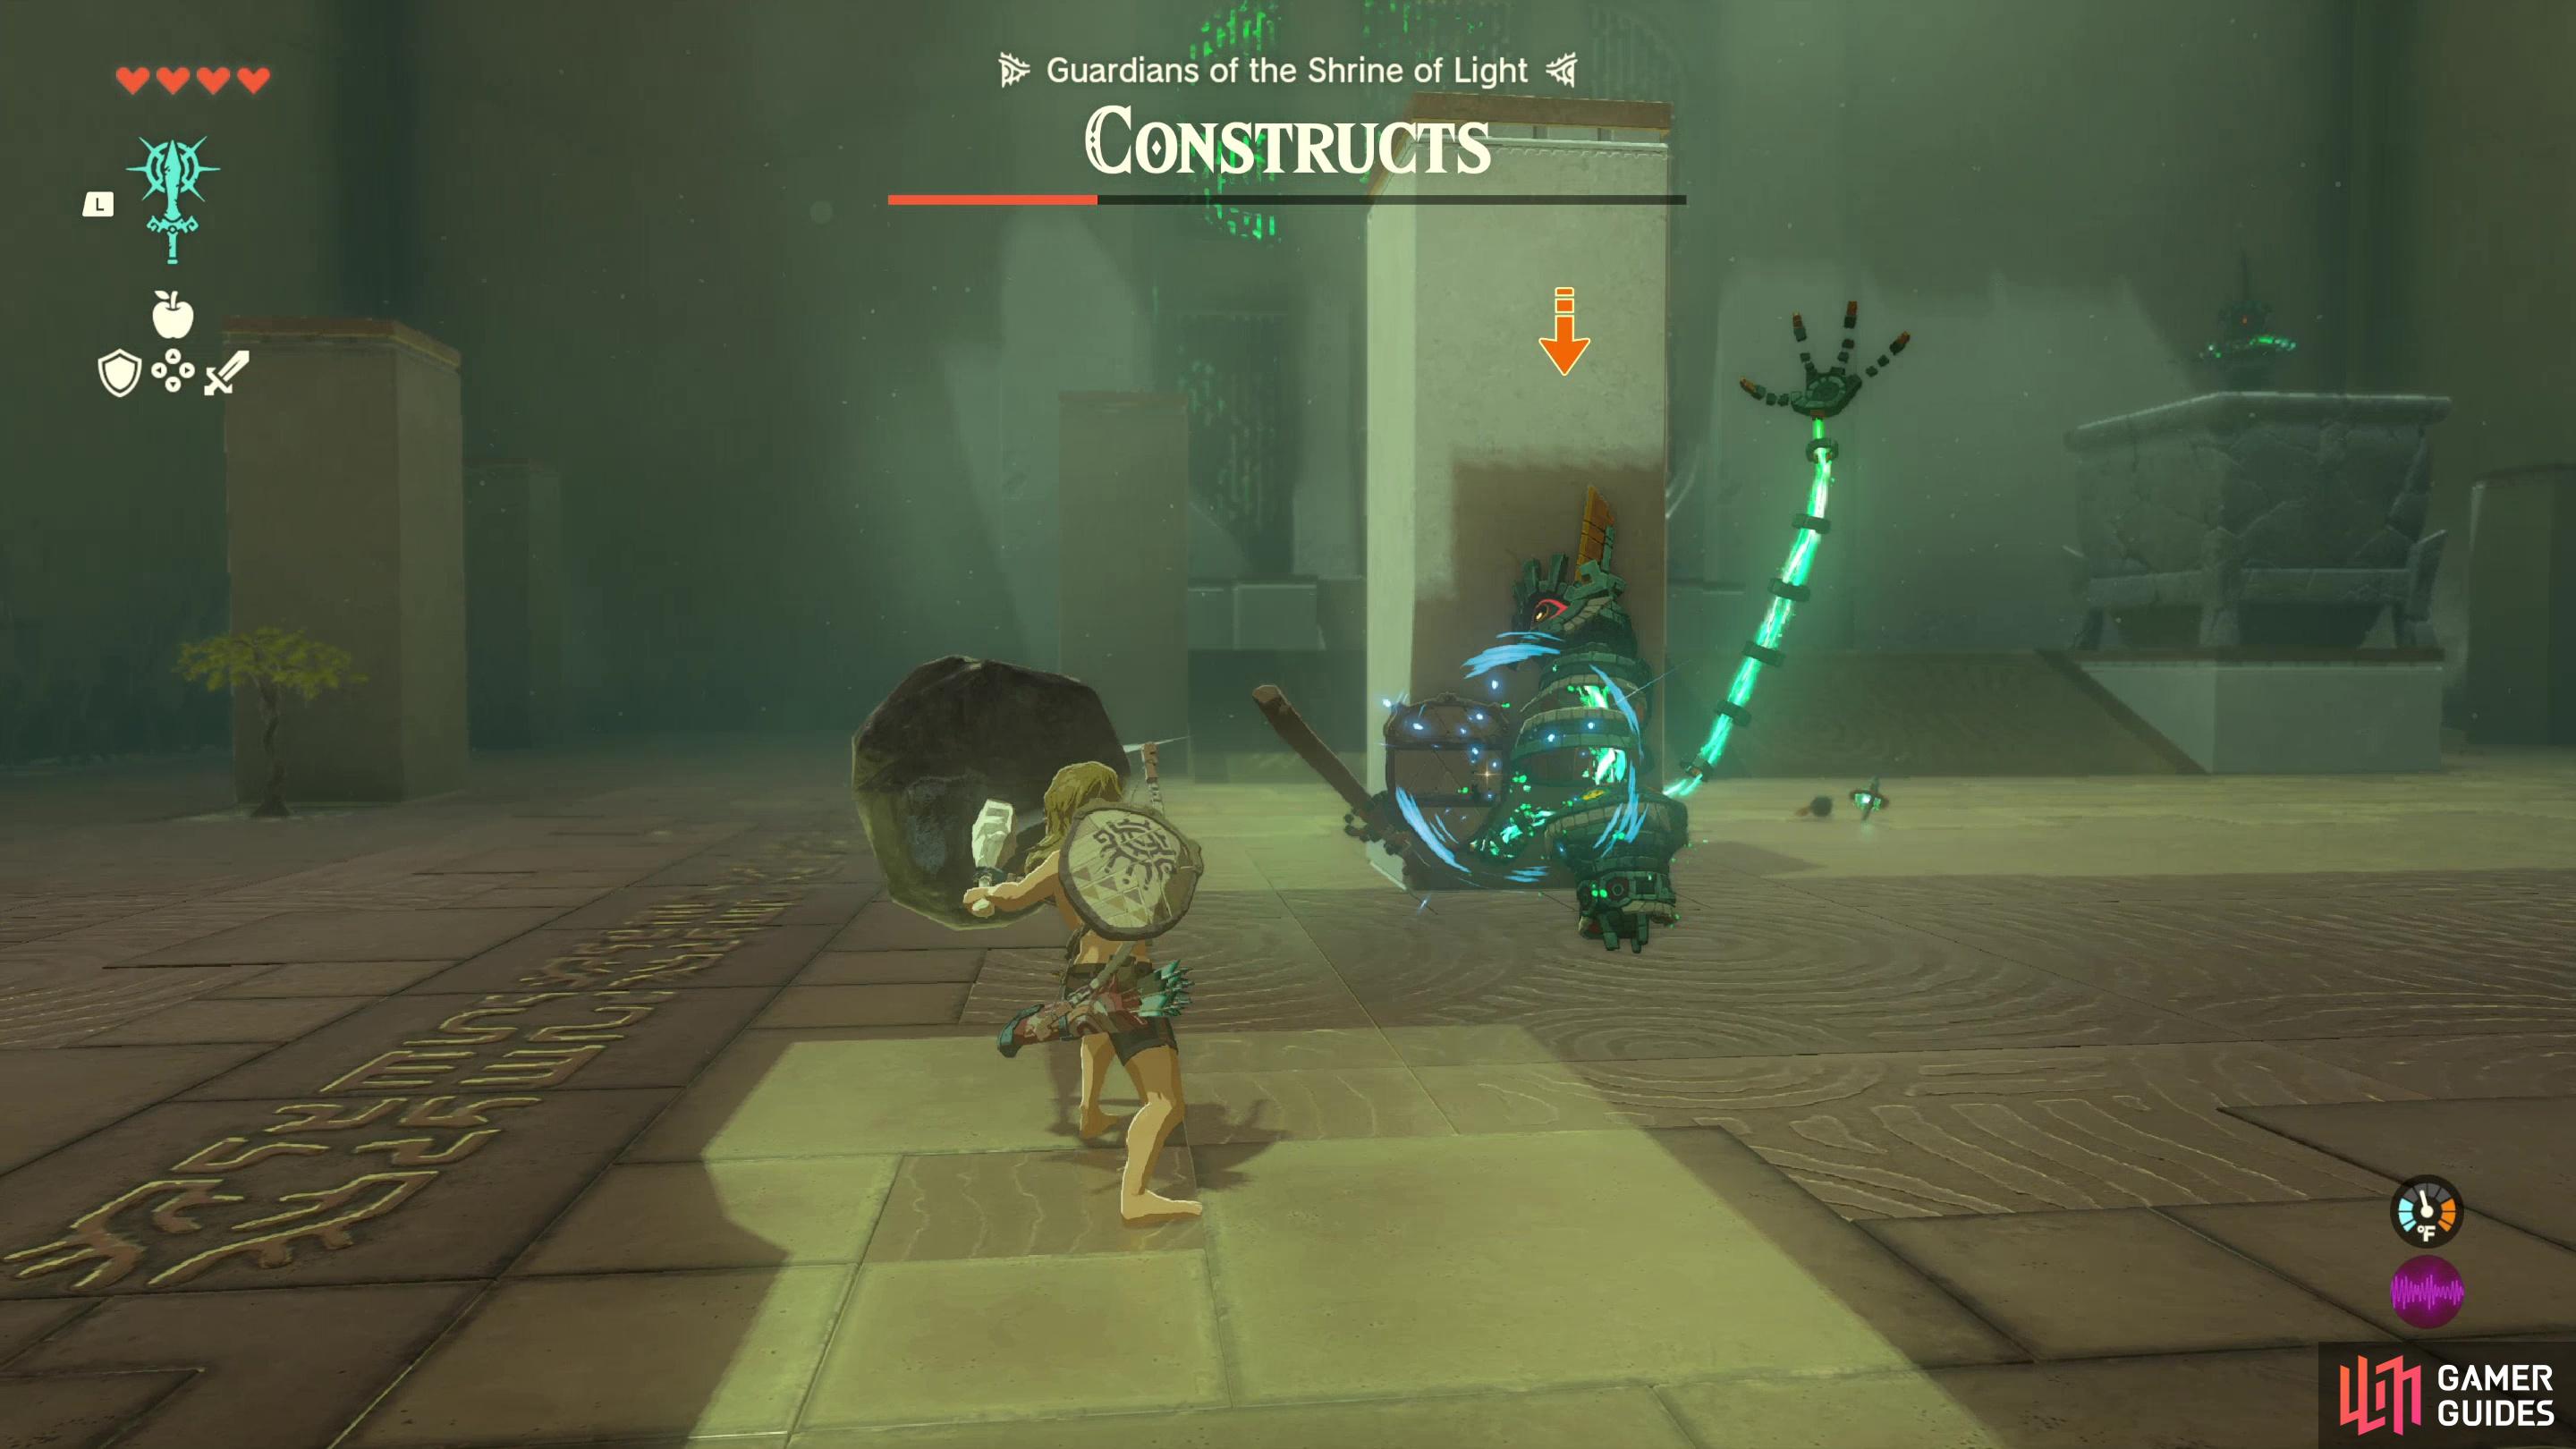 A Construct in the Shrine of Light